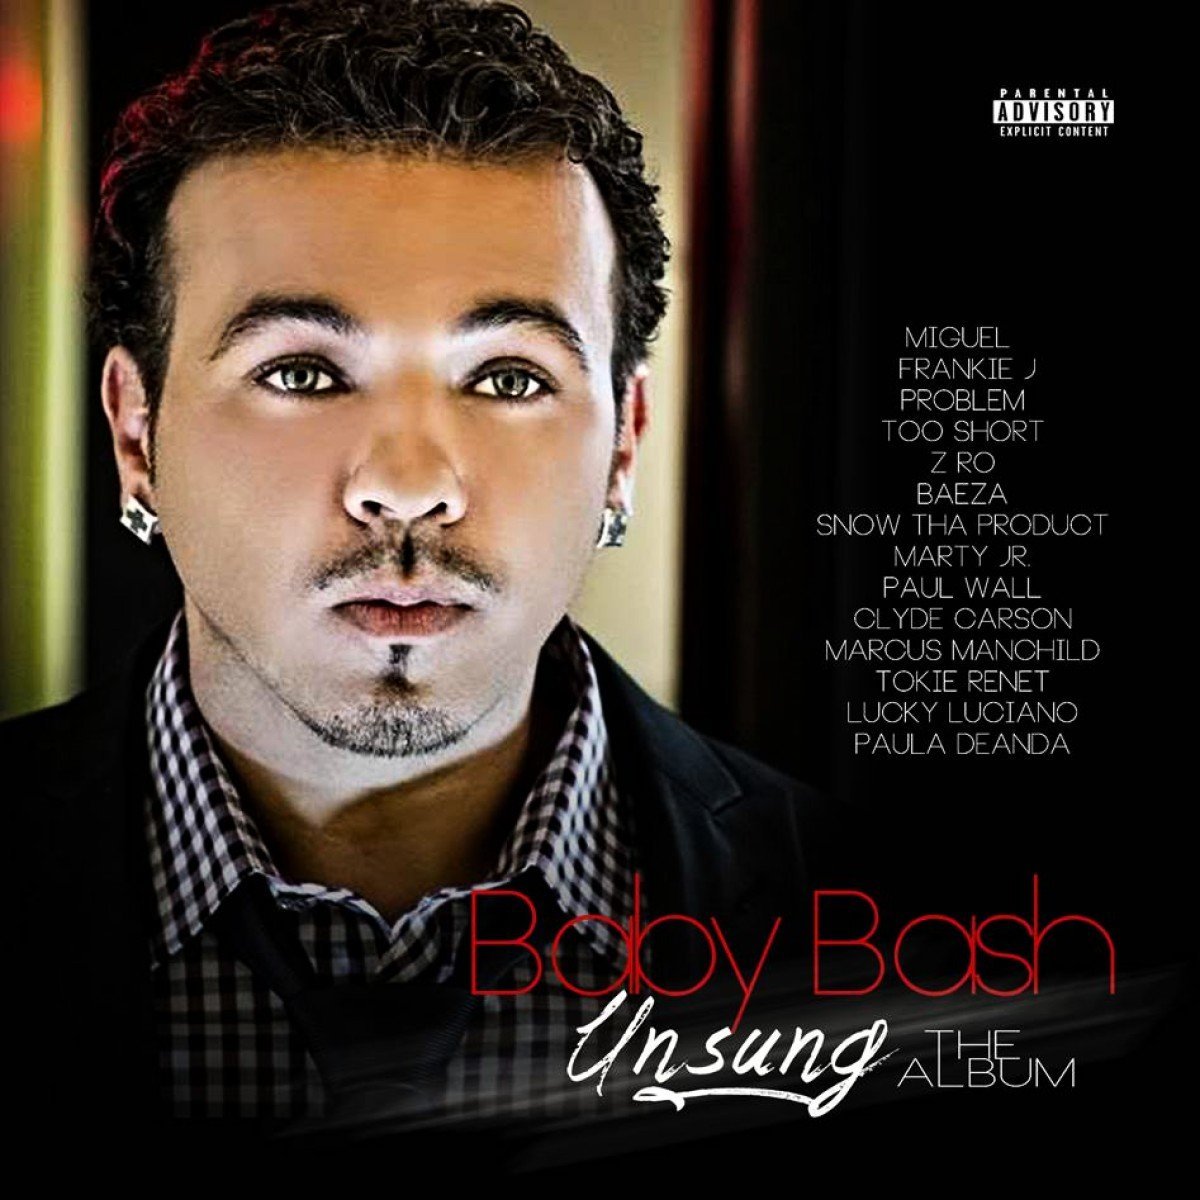 News Added Jan 08, 2014 Unsung The Album is the first full and official release on Baby Bash's own label, Bashtown. The album features four singles that have all spun on radio including "Slide" featuring Miguel, "Break It Down" featuring Too Short and "Dance All Night" featuring Problem as well as the new single at […]